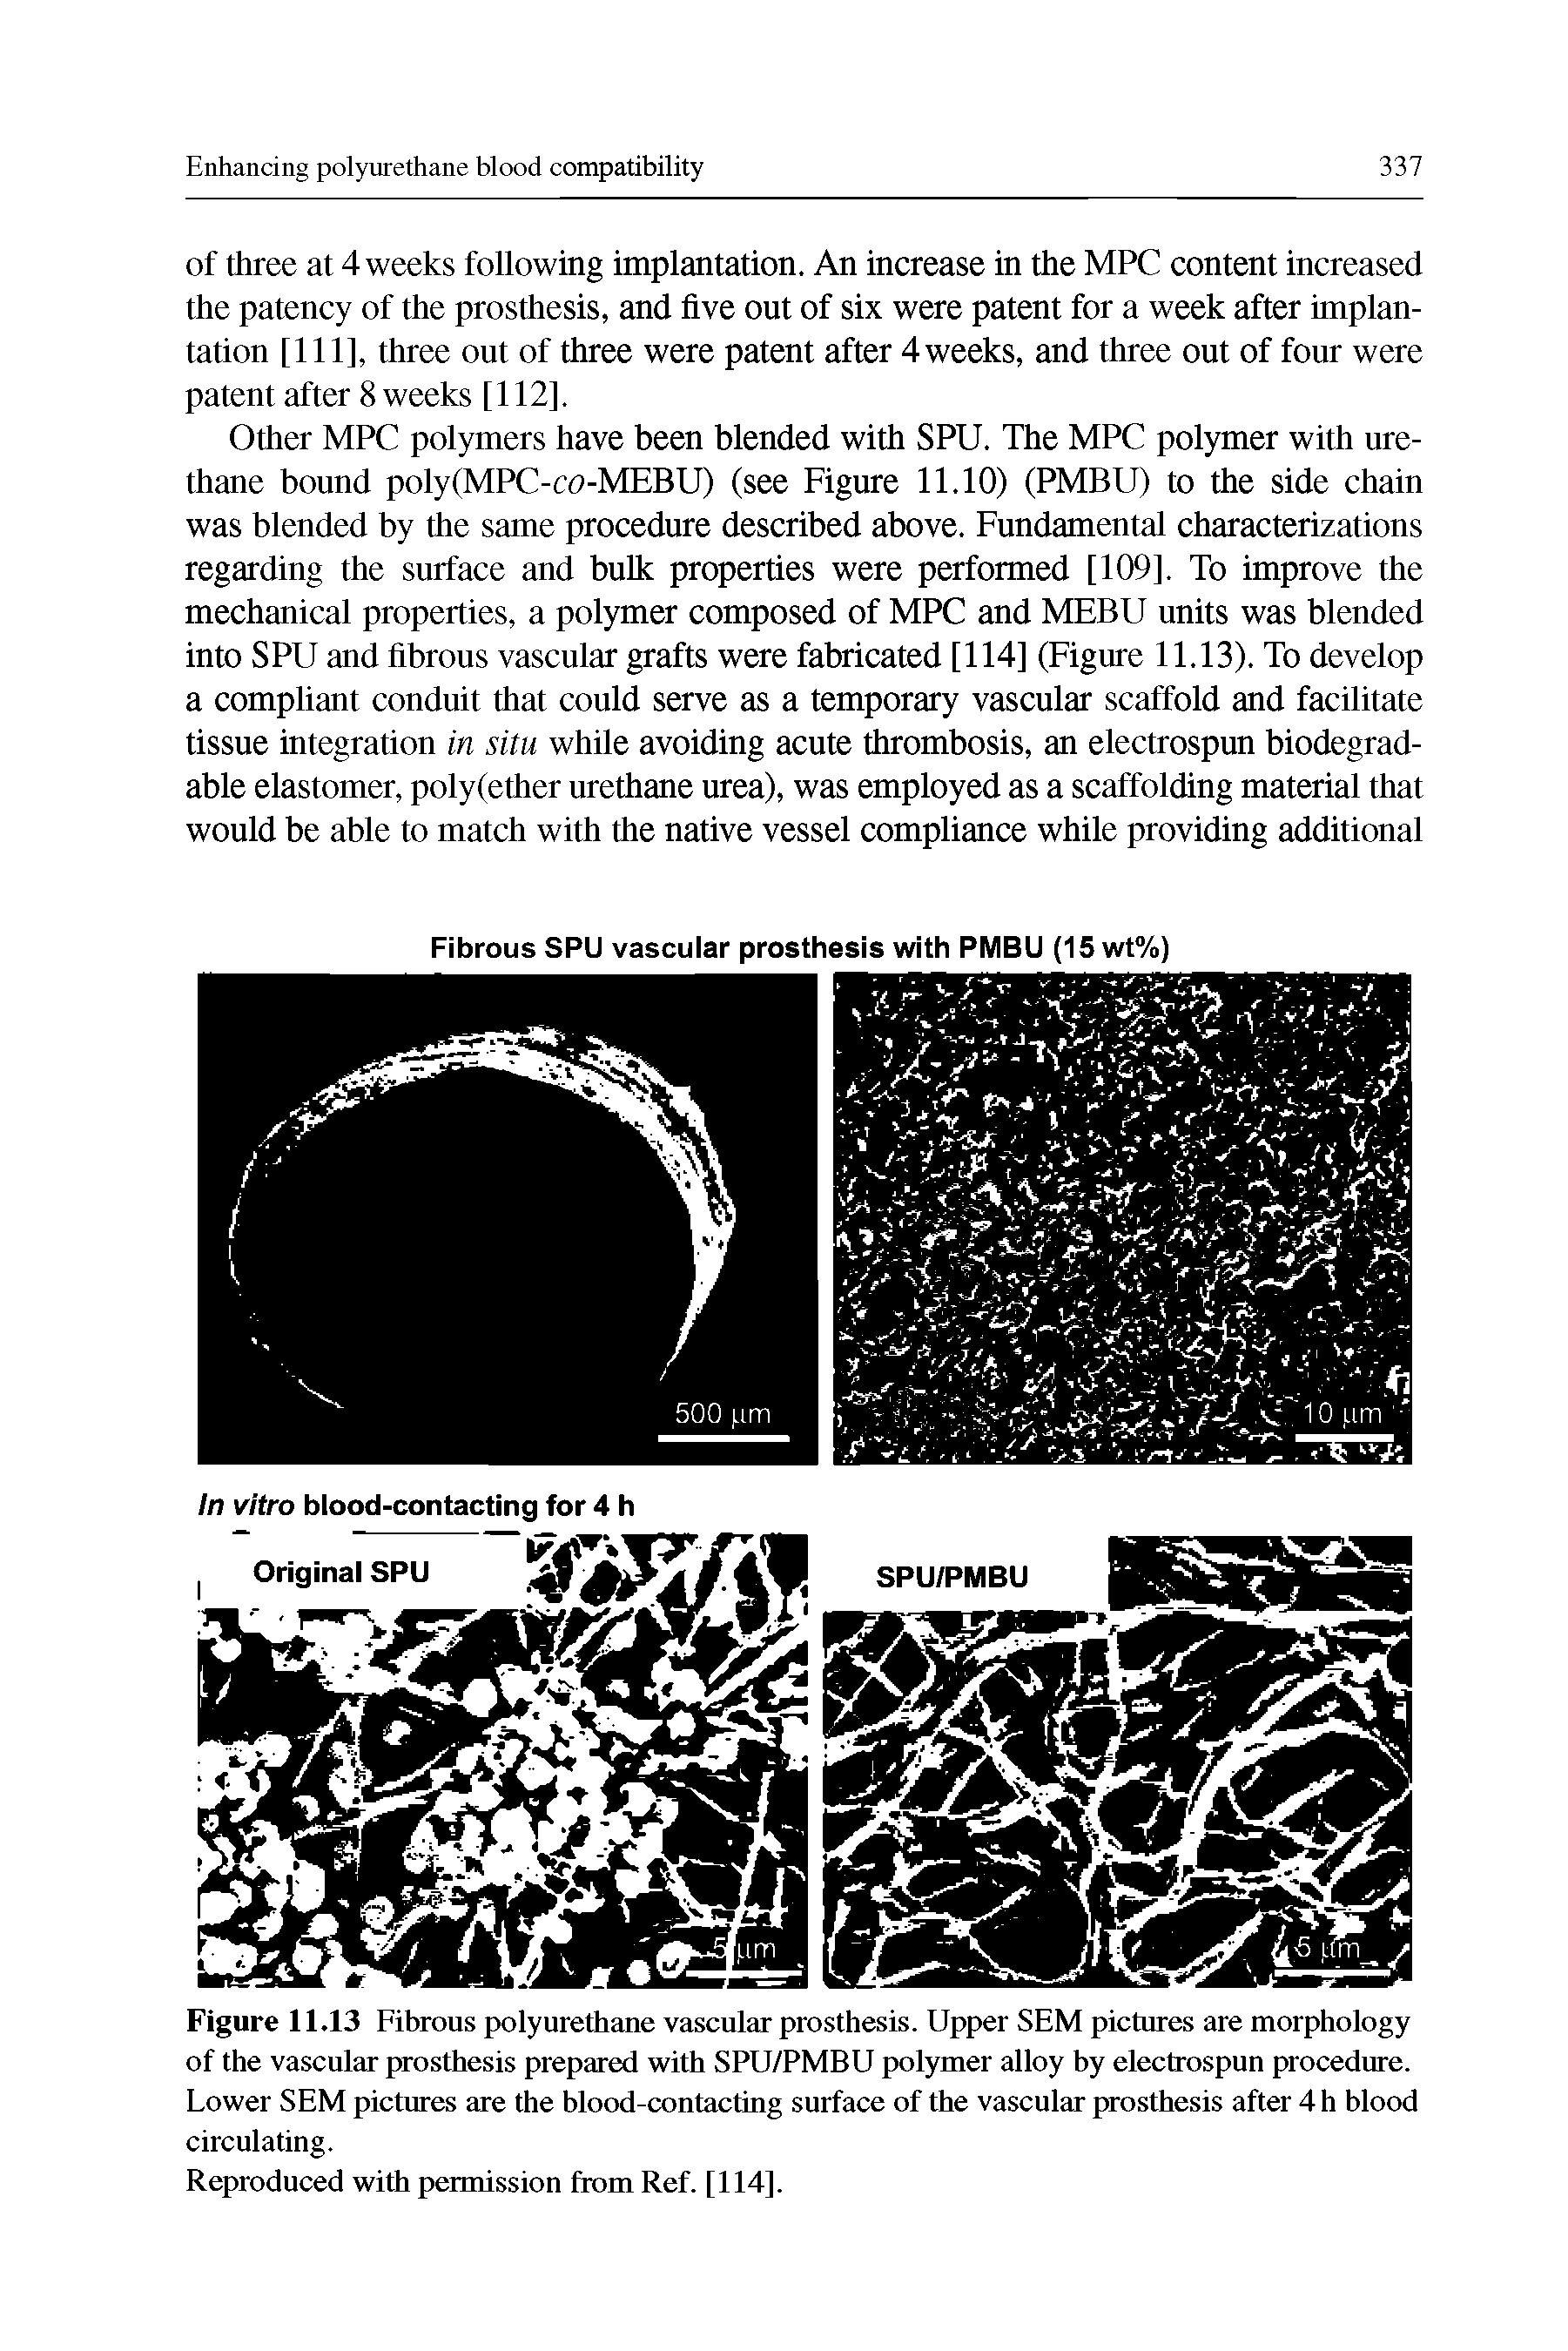 Figure 11.13 Fibrous polyurethane vascular prosthesis. Upper SEM pictures are morphology of the vascular prosthesis prepared with SPU/PMBU polymer alloy by electrospun procedure. Lower SEM pictures are the blood-contacting surface of the vascular prosthesis after 4 h blood circulating.